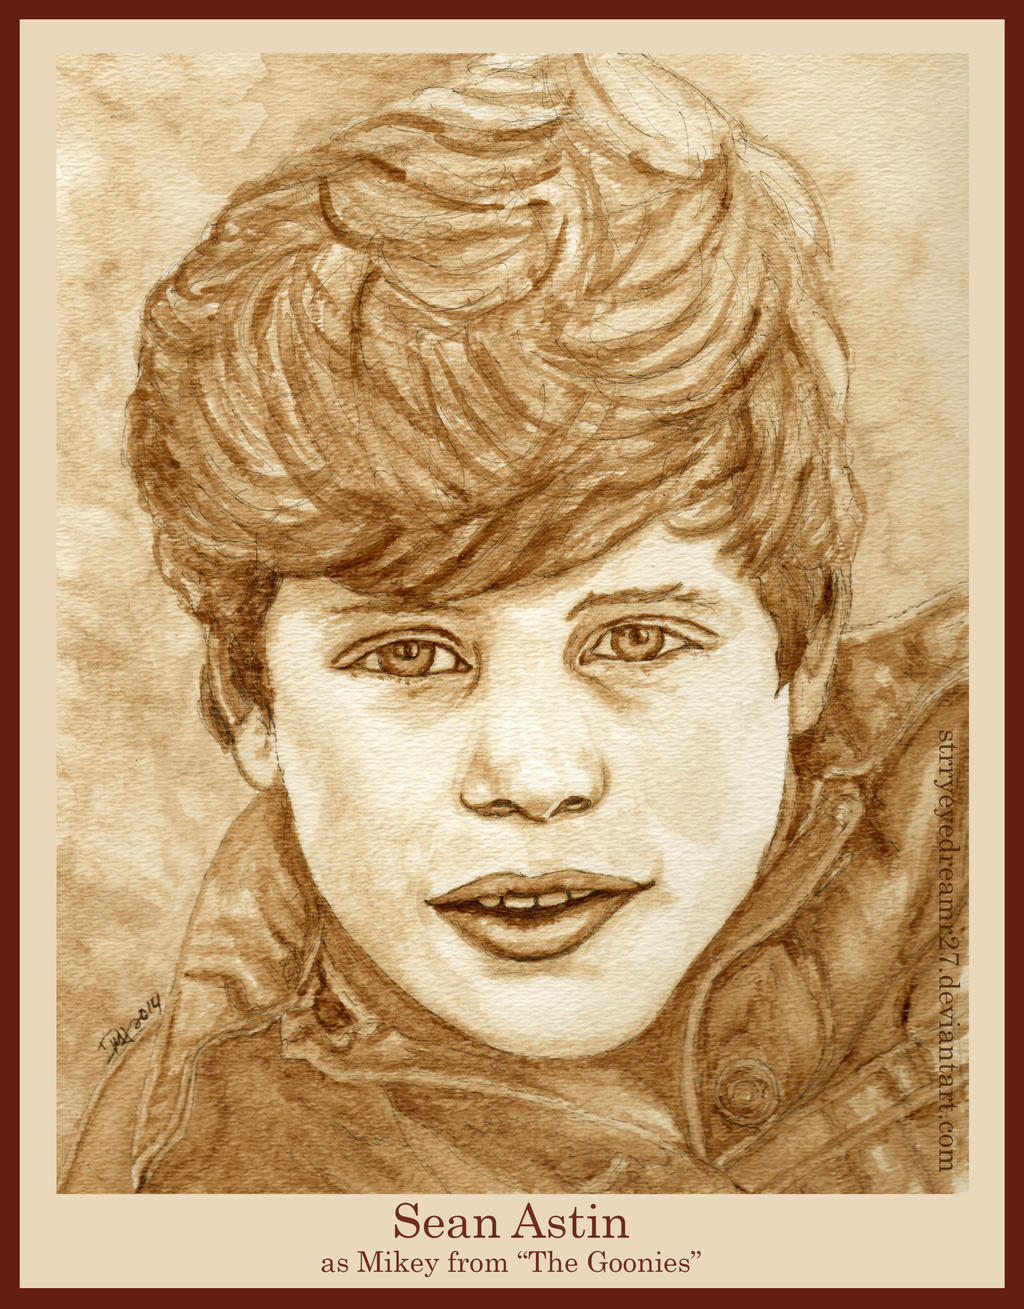 sean_astin_as_mikey_from__the_goonies__by_strryeyedreamr27_d8eujrz-fullview.jpg